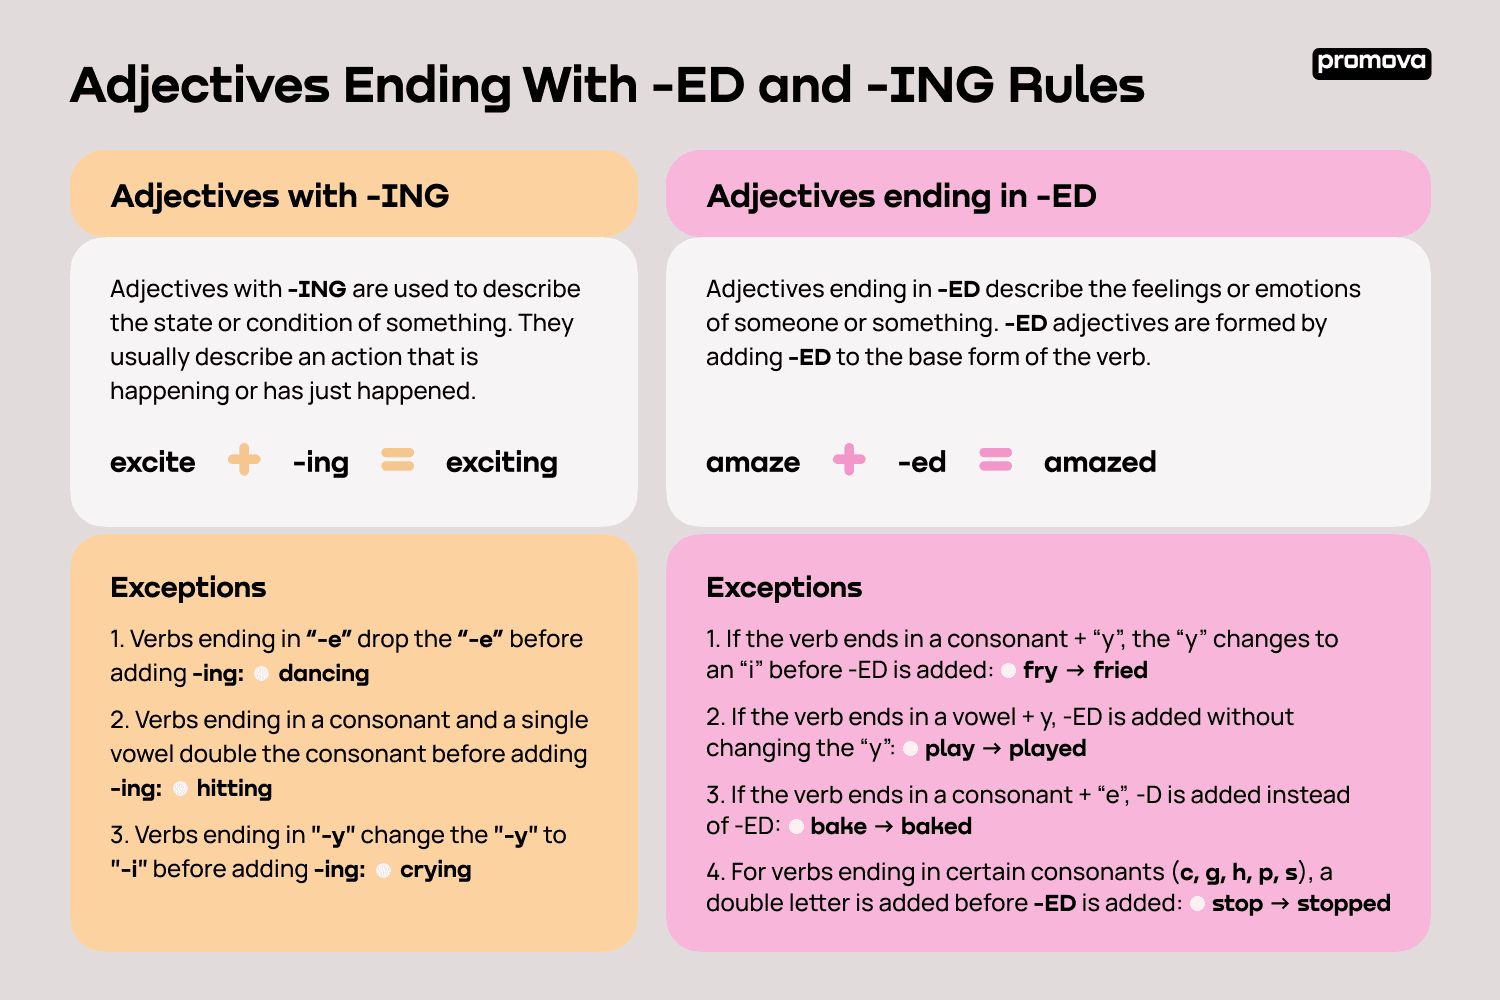 Adjectives Ending With -ED and -ING Rules